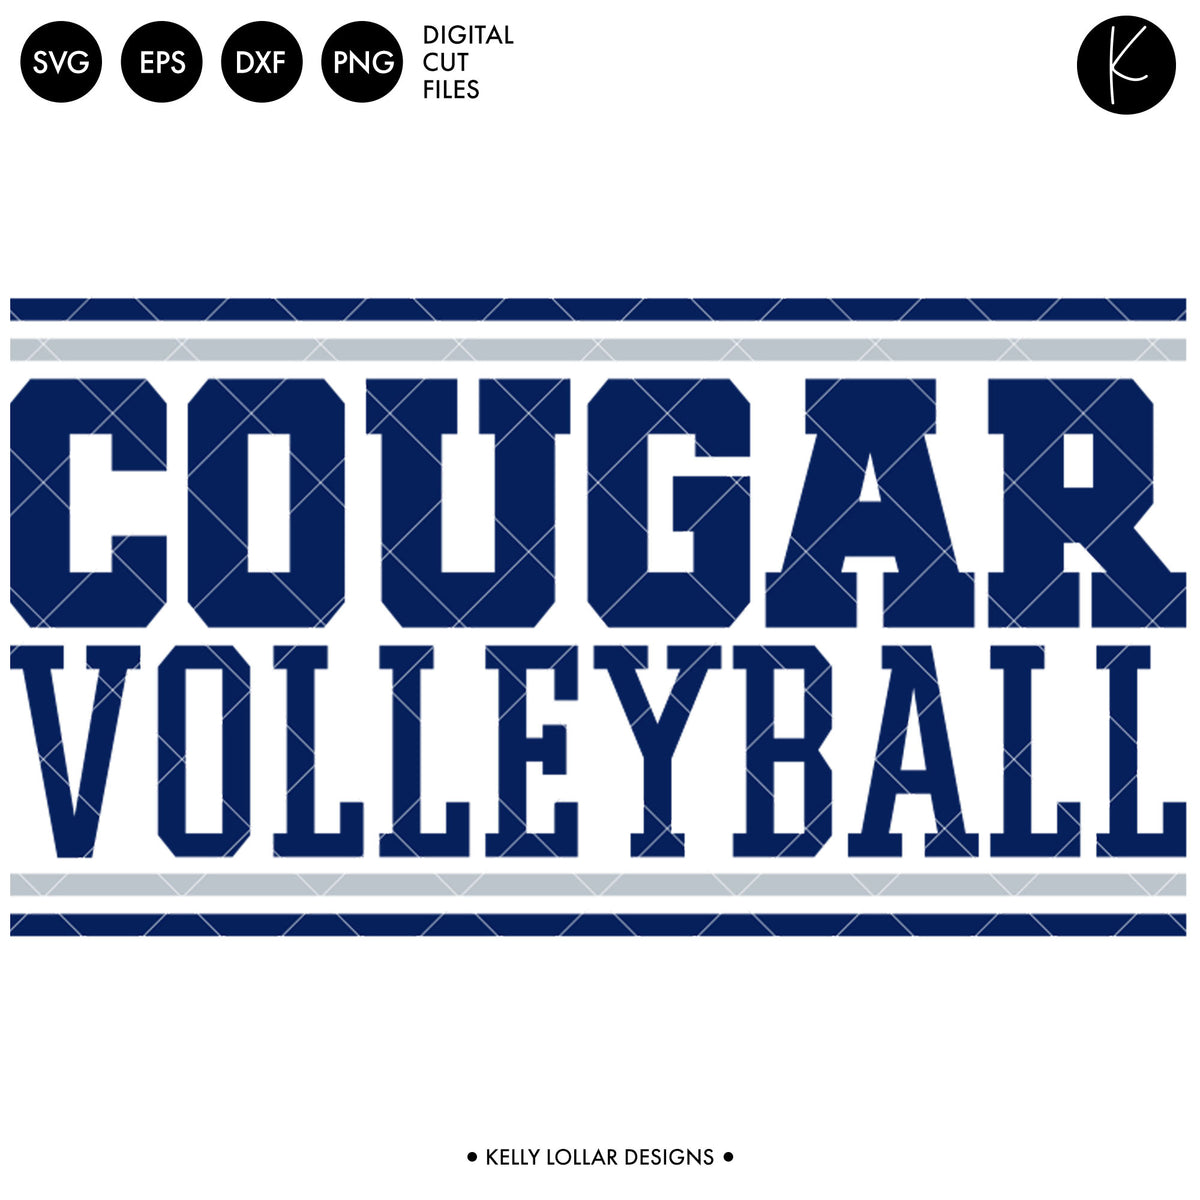 Cougars Volleyball | SVG DXF EPS PNG Cut Files